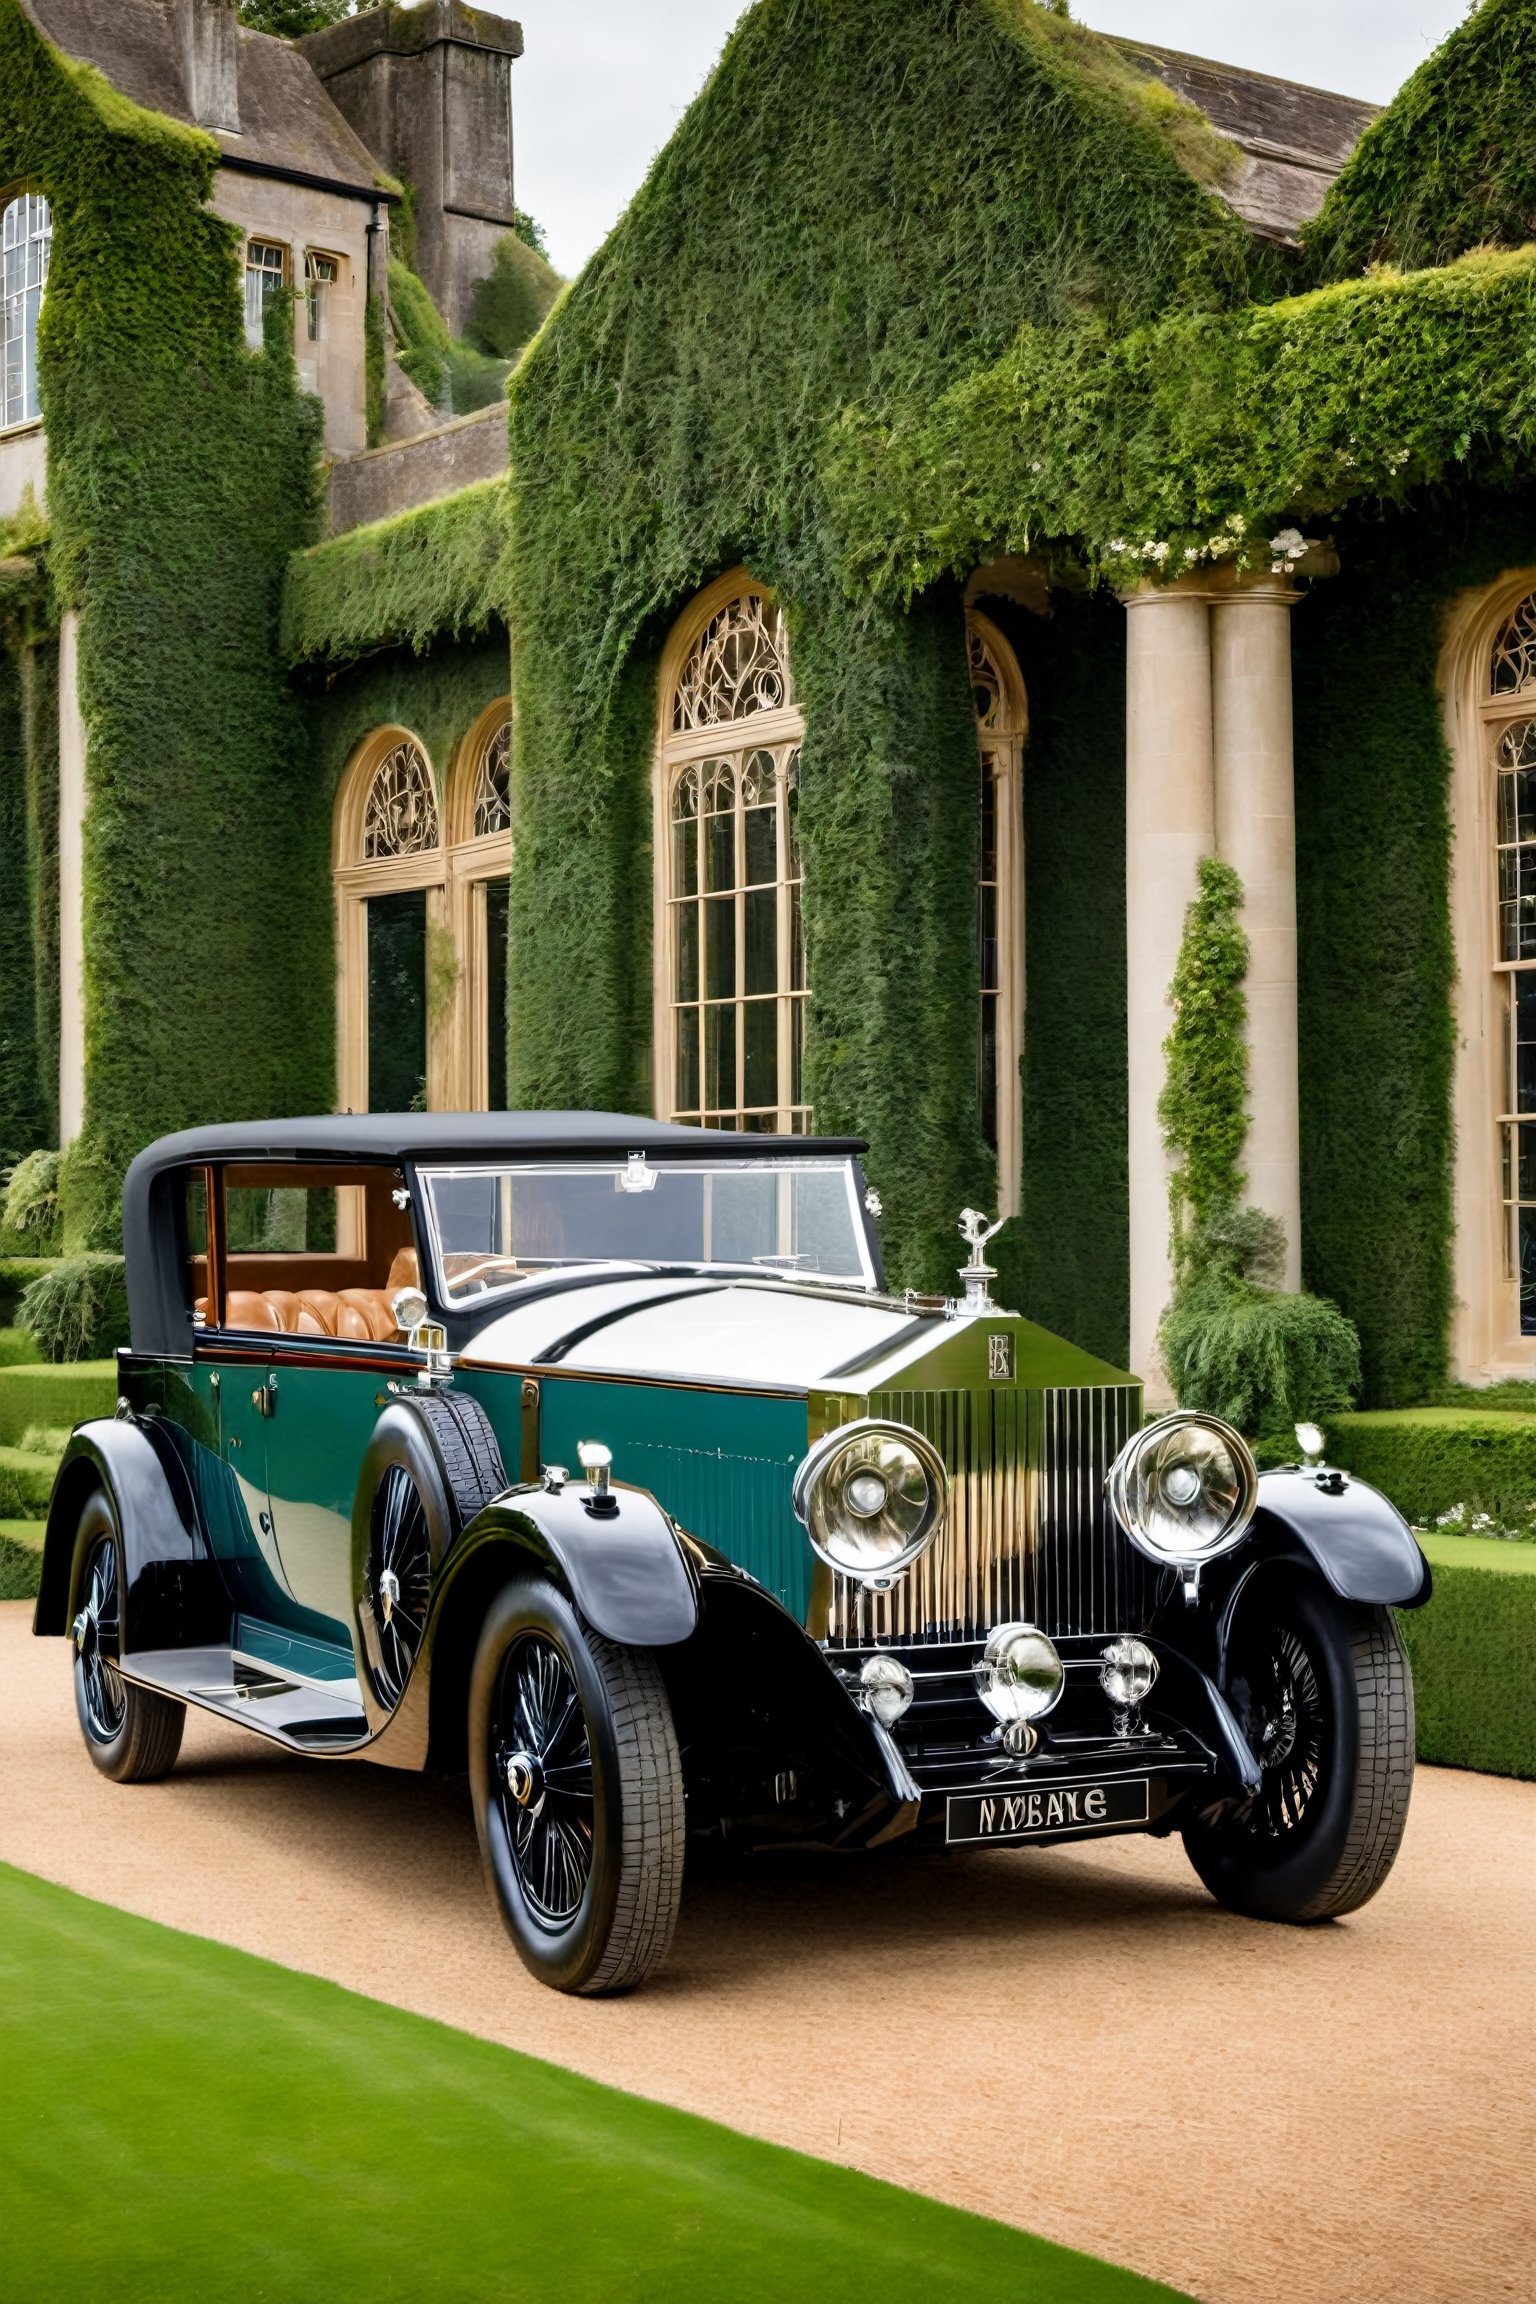 #McBane: An extravagant 1920s Rolls Royce showroom, with intricate carvings and intricate details, surrounded by the lush greenery of the English countryside